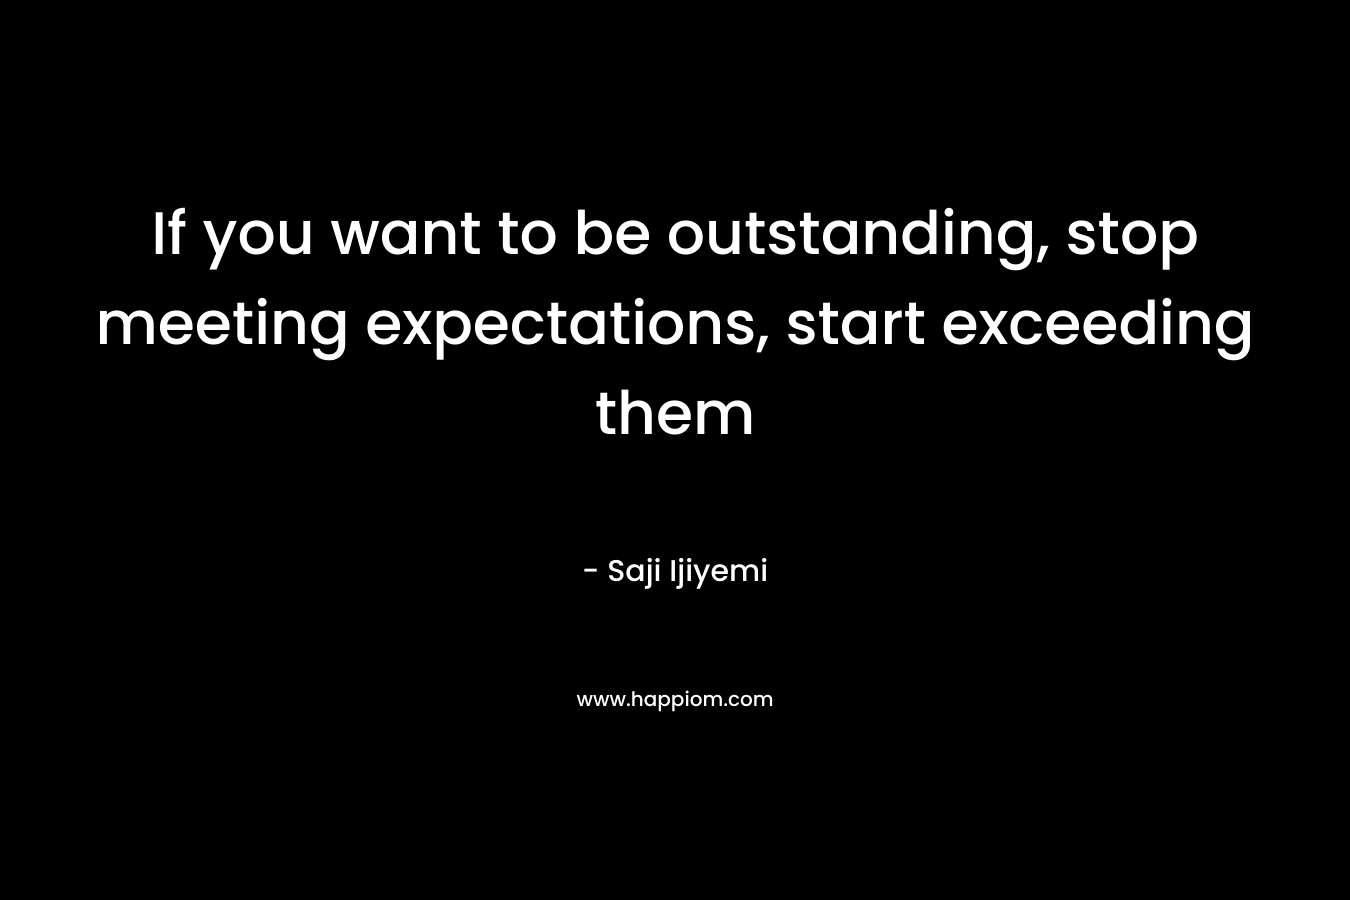 If you want to be outstanding, stop meeting expectations, start exceeding them – Saji Ijiyemi